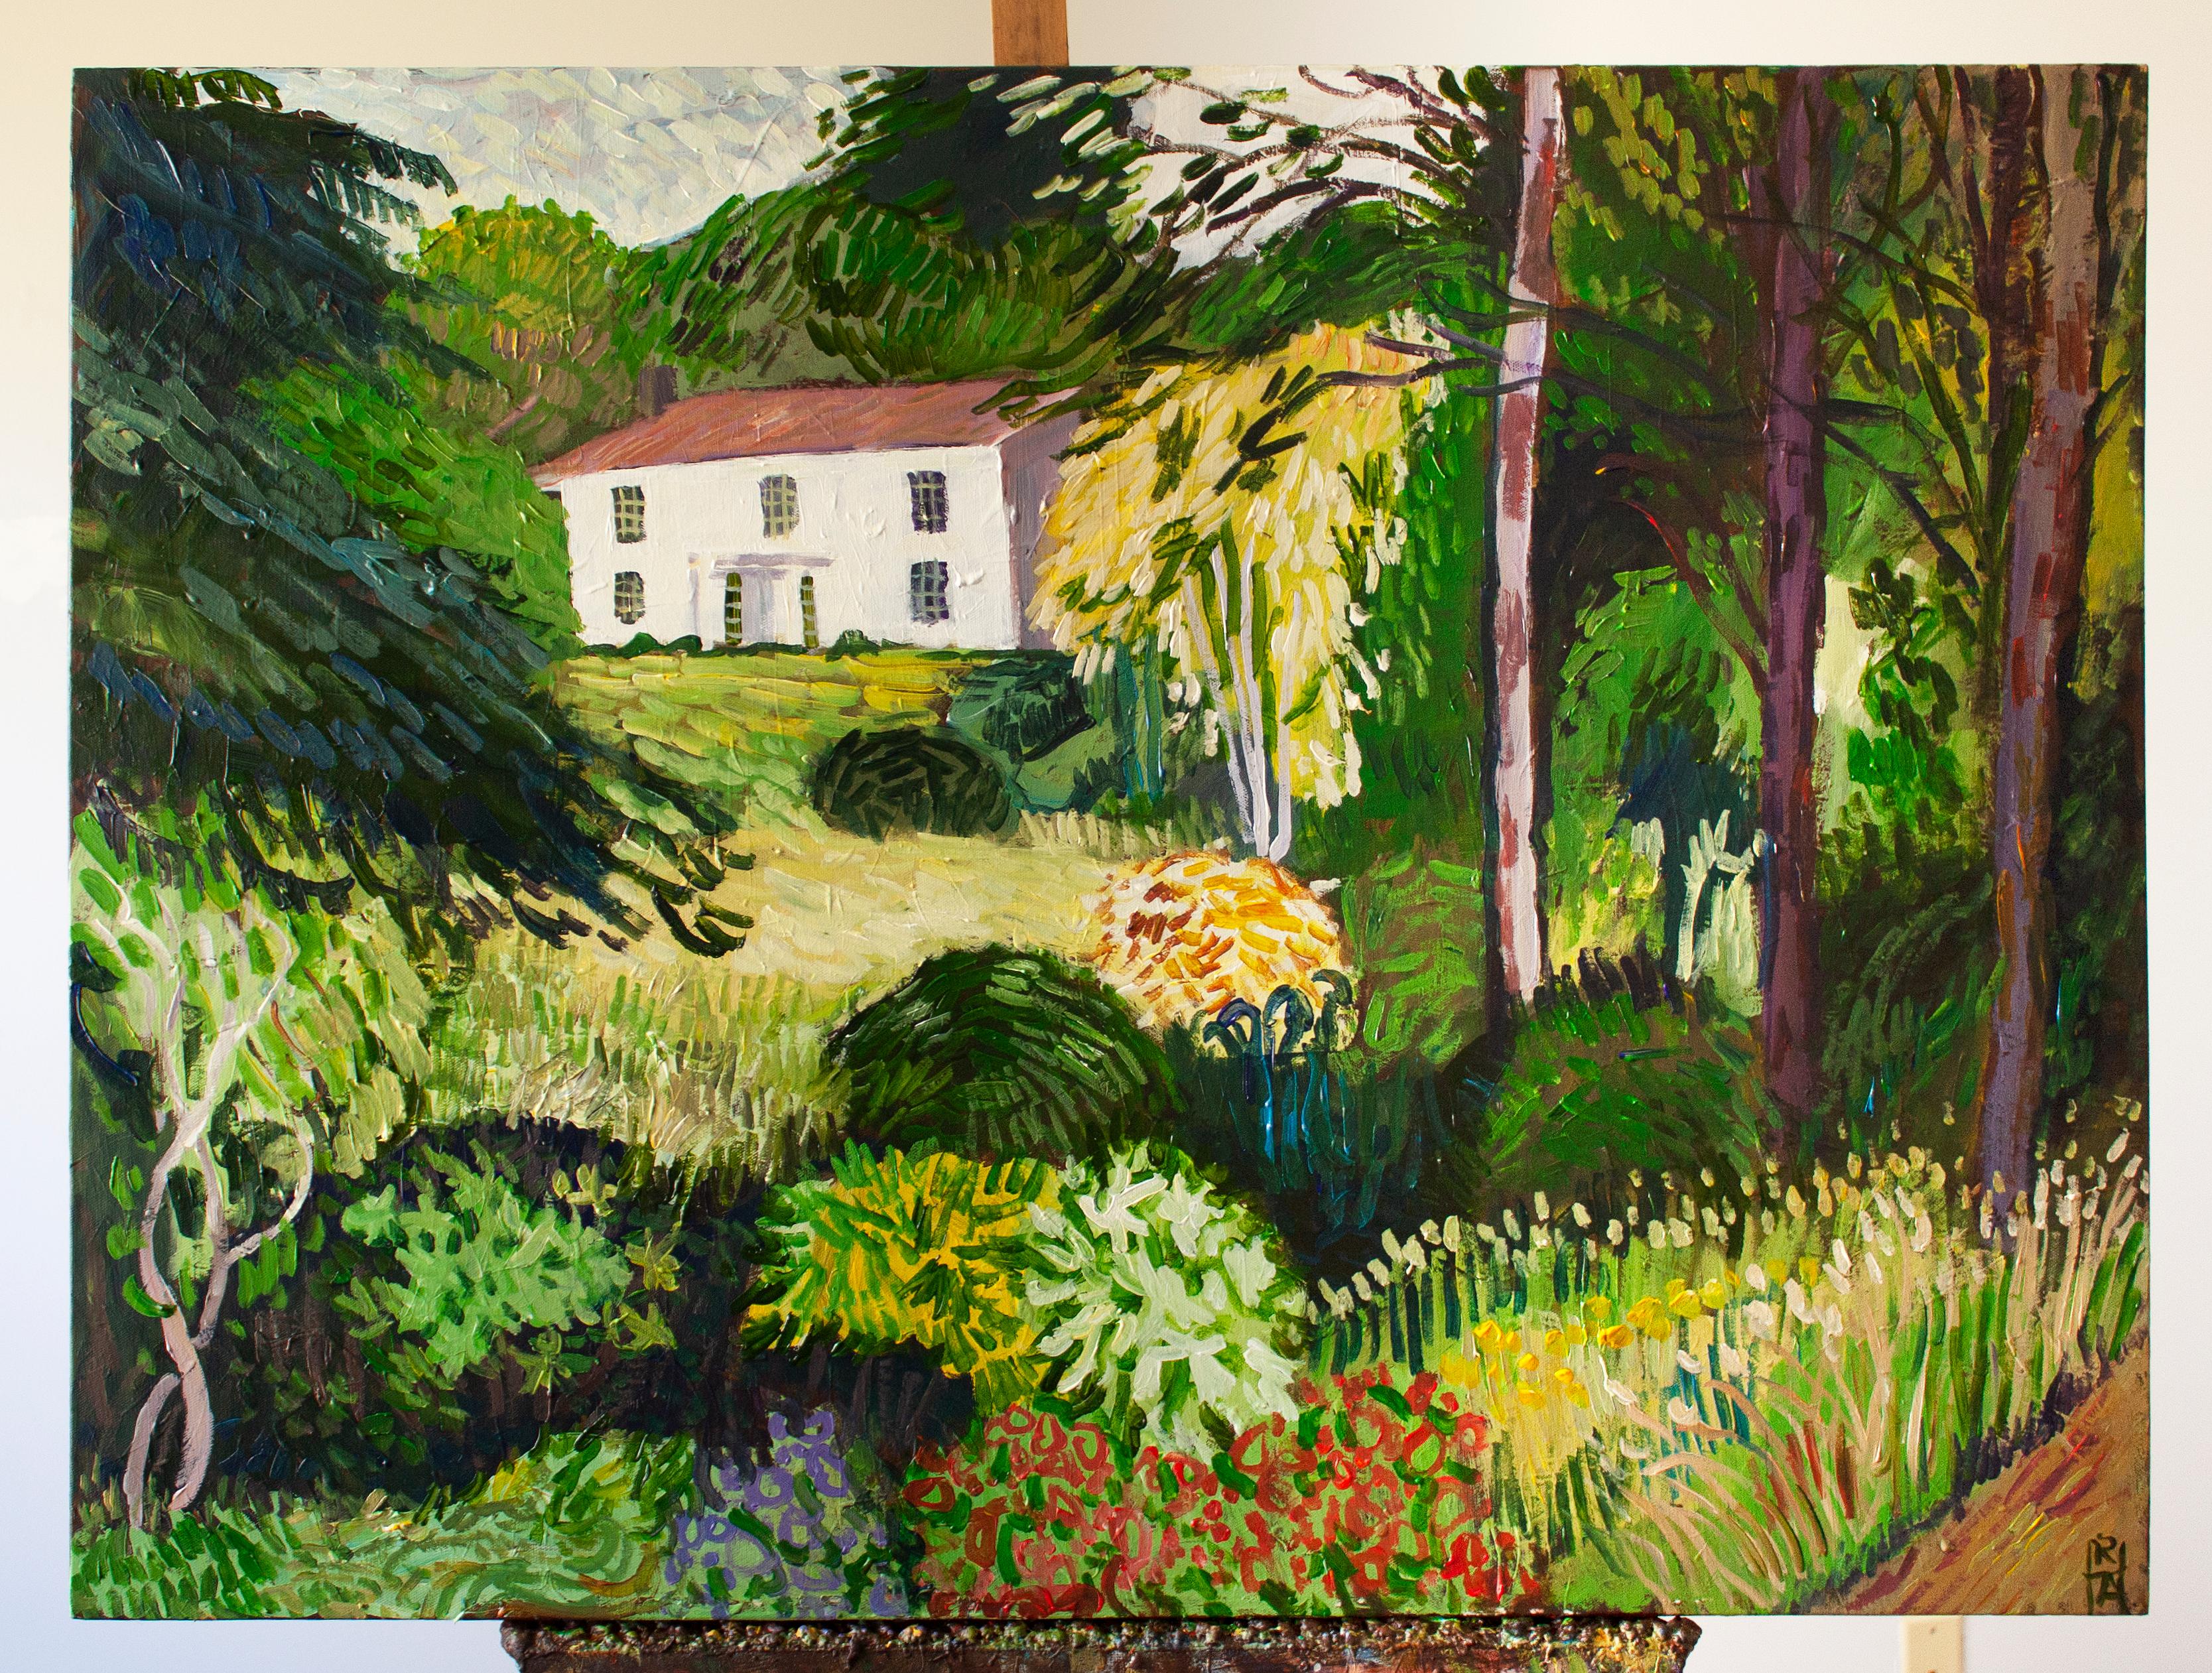 <p>Artist Comments<br />A view of an old home nestled in a verdant landscape, inspired by the lushness of spring growth in the mid-Atlantic. 